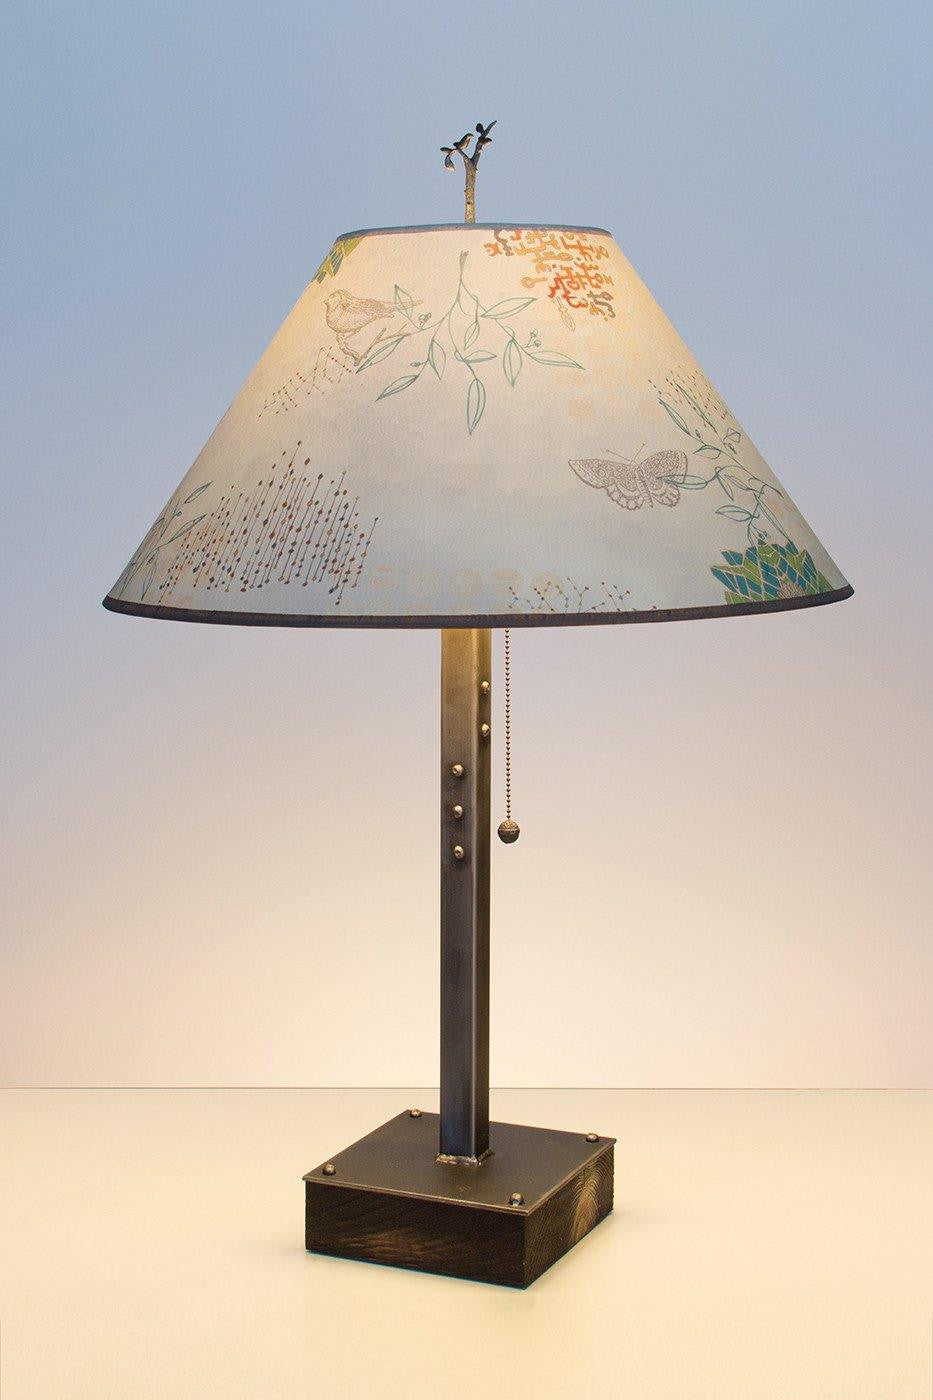 Janna Ugone & Co Table Lamps Steel Table Lamp on Wood with Large Conical Shade in Ecru Journey